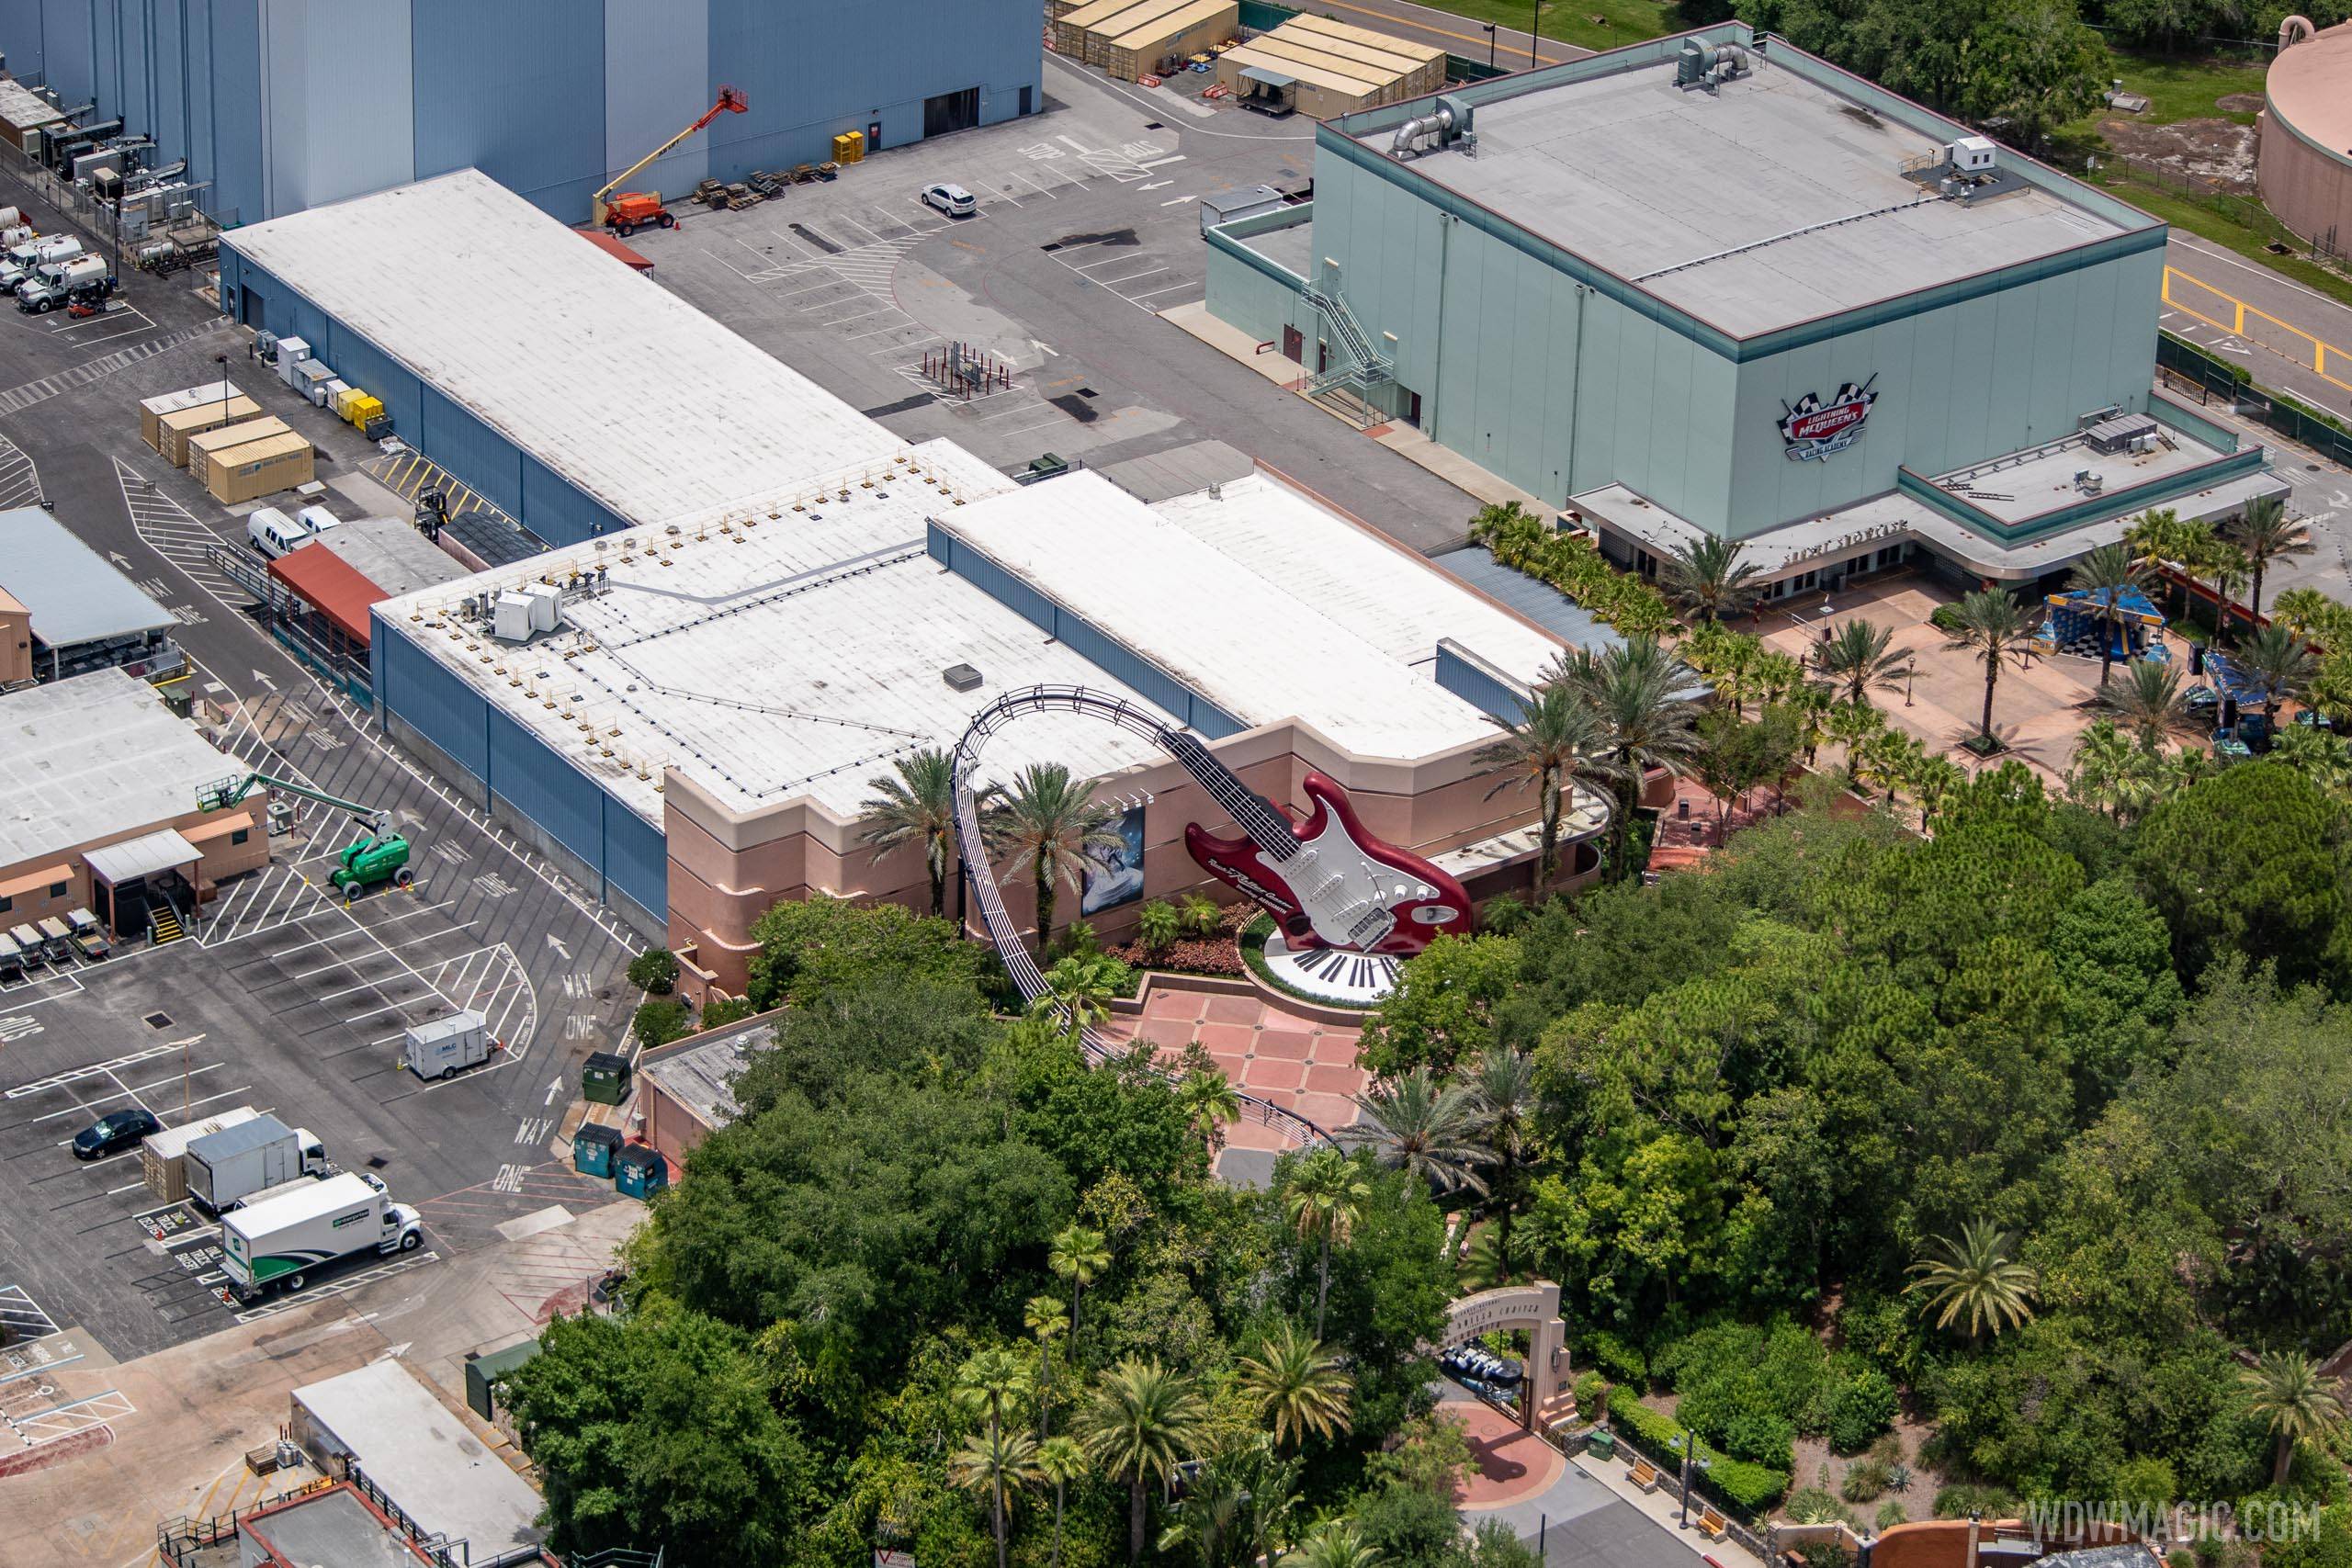 Rock 'n' Roller Coaster will be closed for a couple of months in 2023